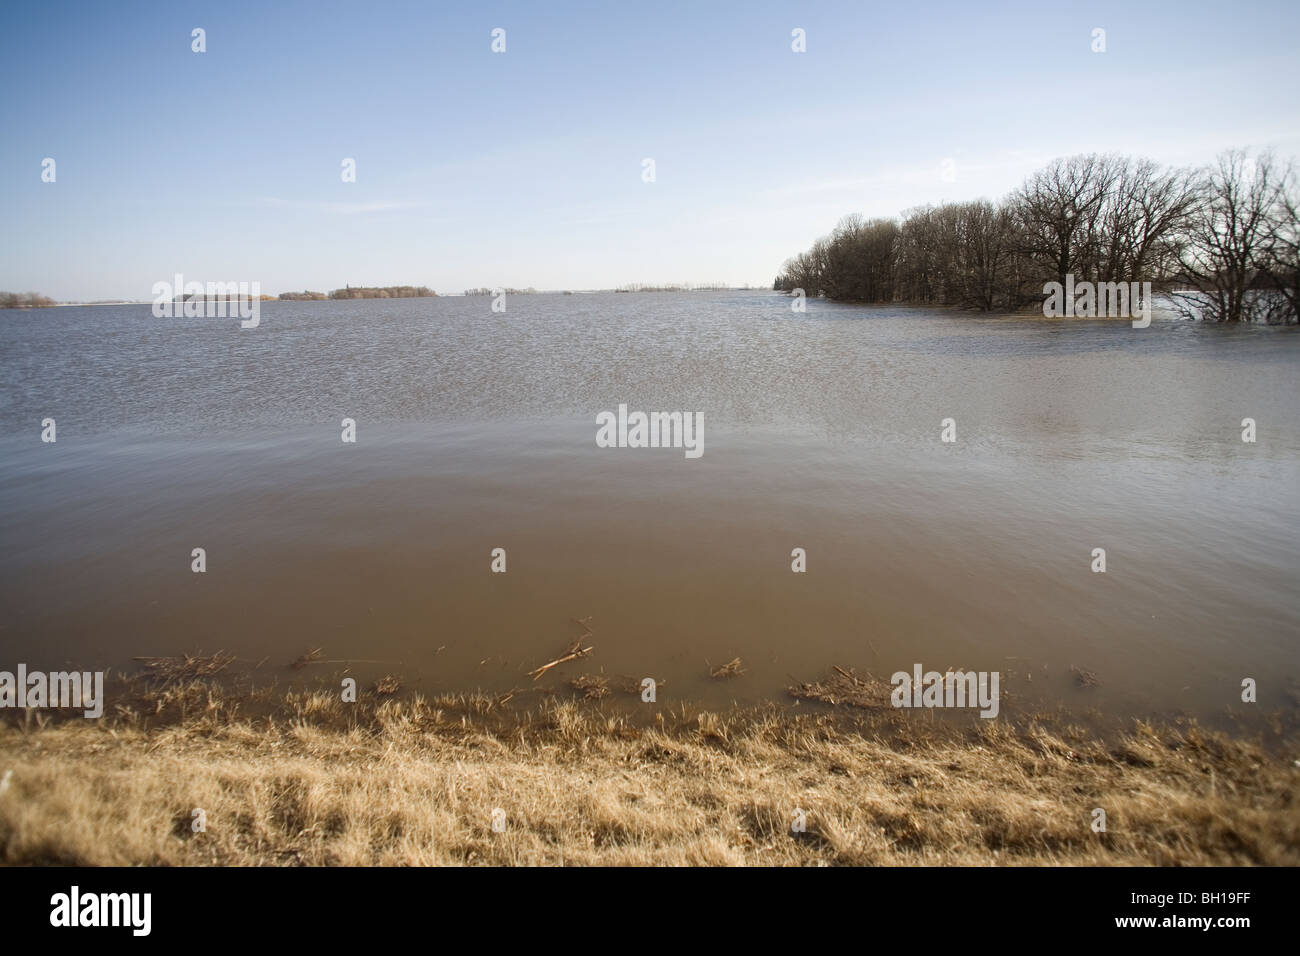 Floodwaters from Red River make field look like a lake, rural Manitoba, Canada Stock Photo